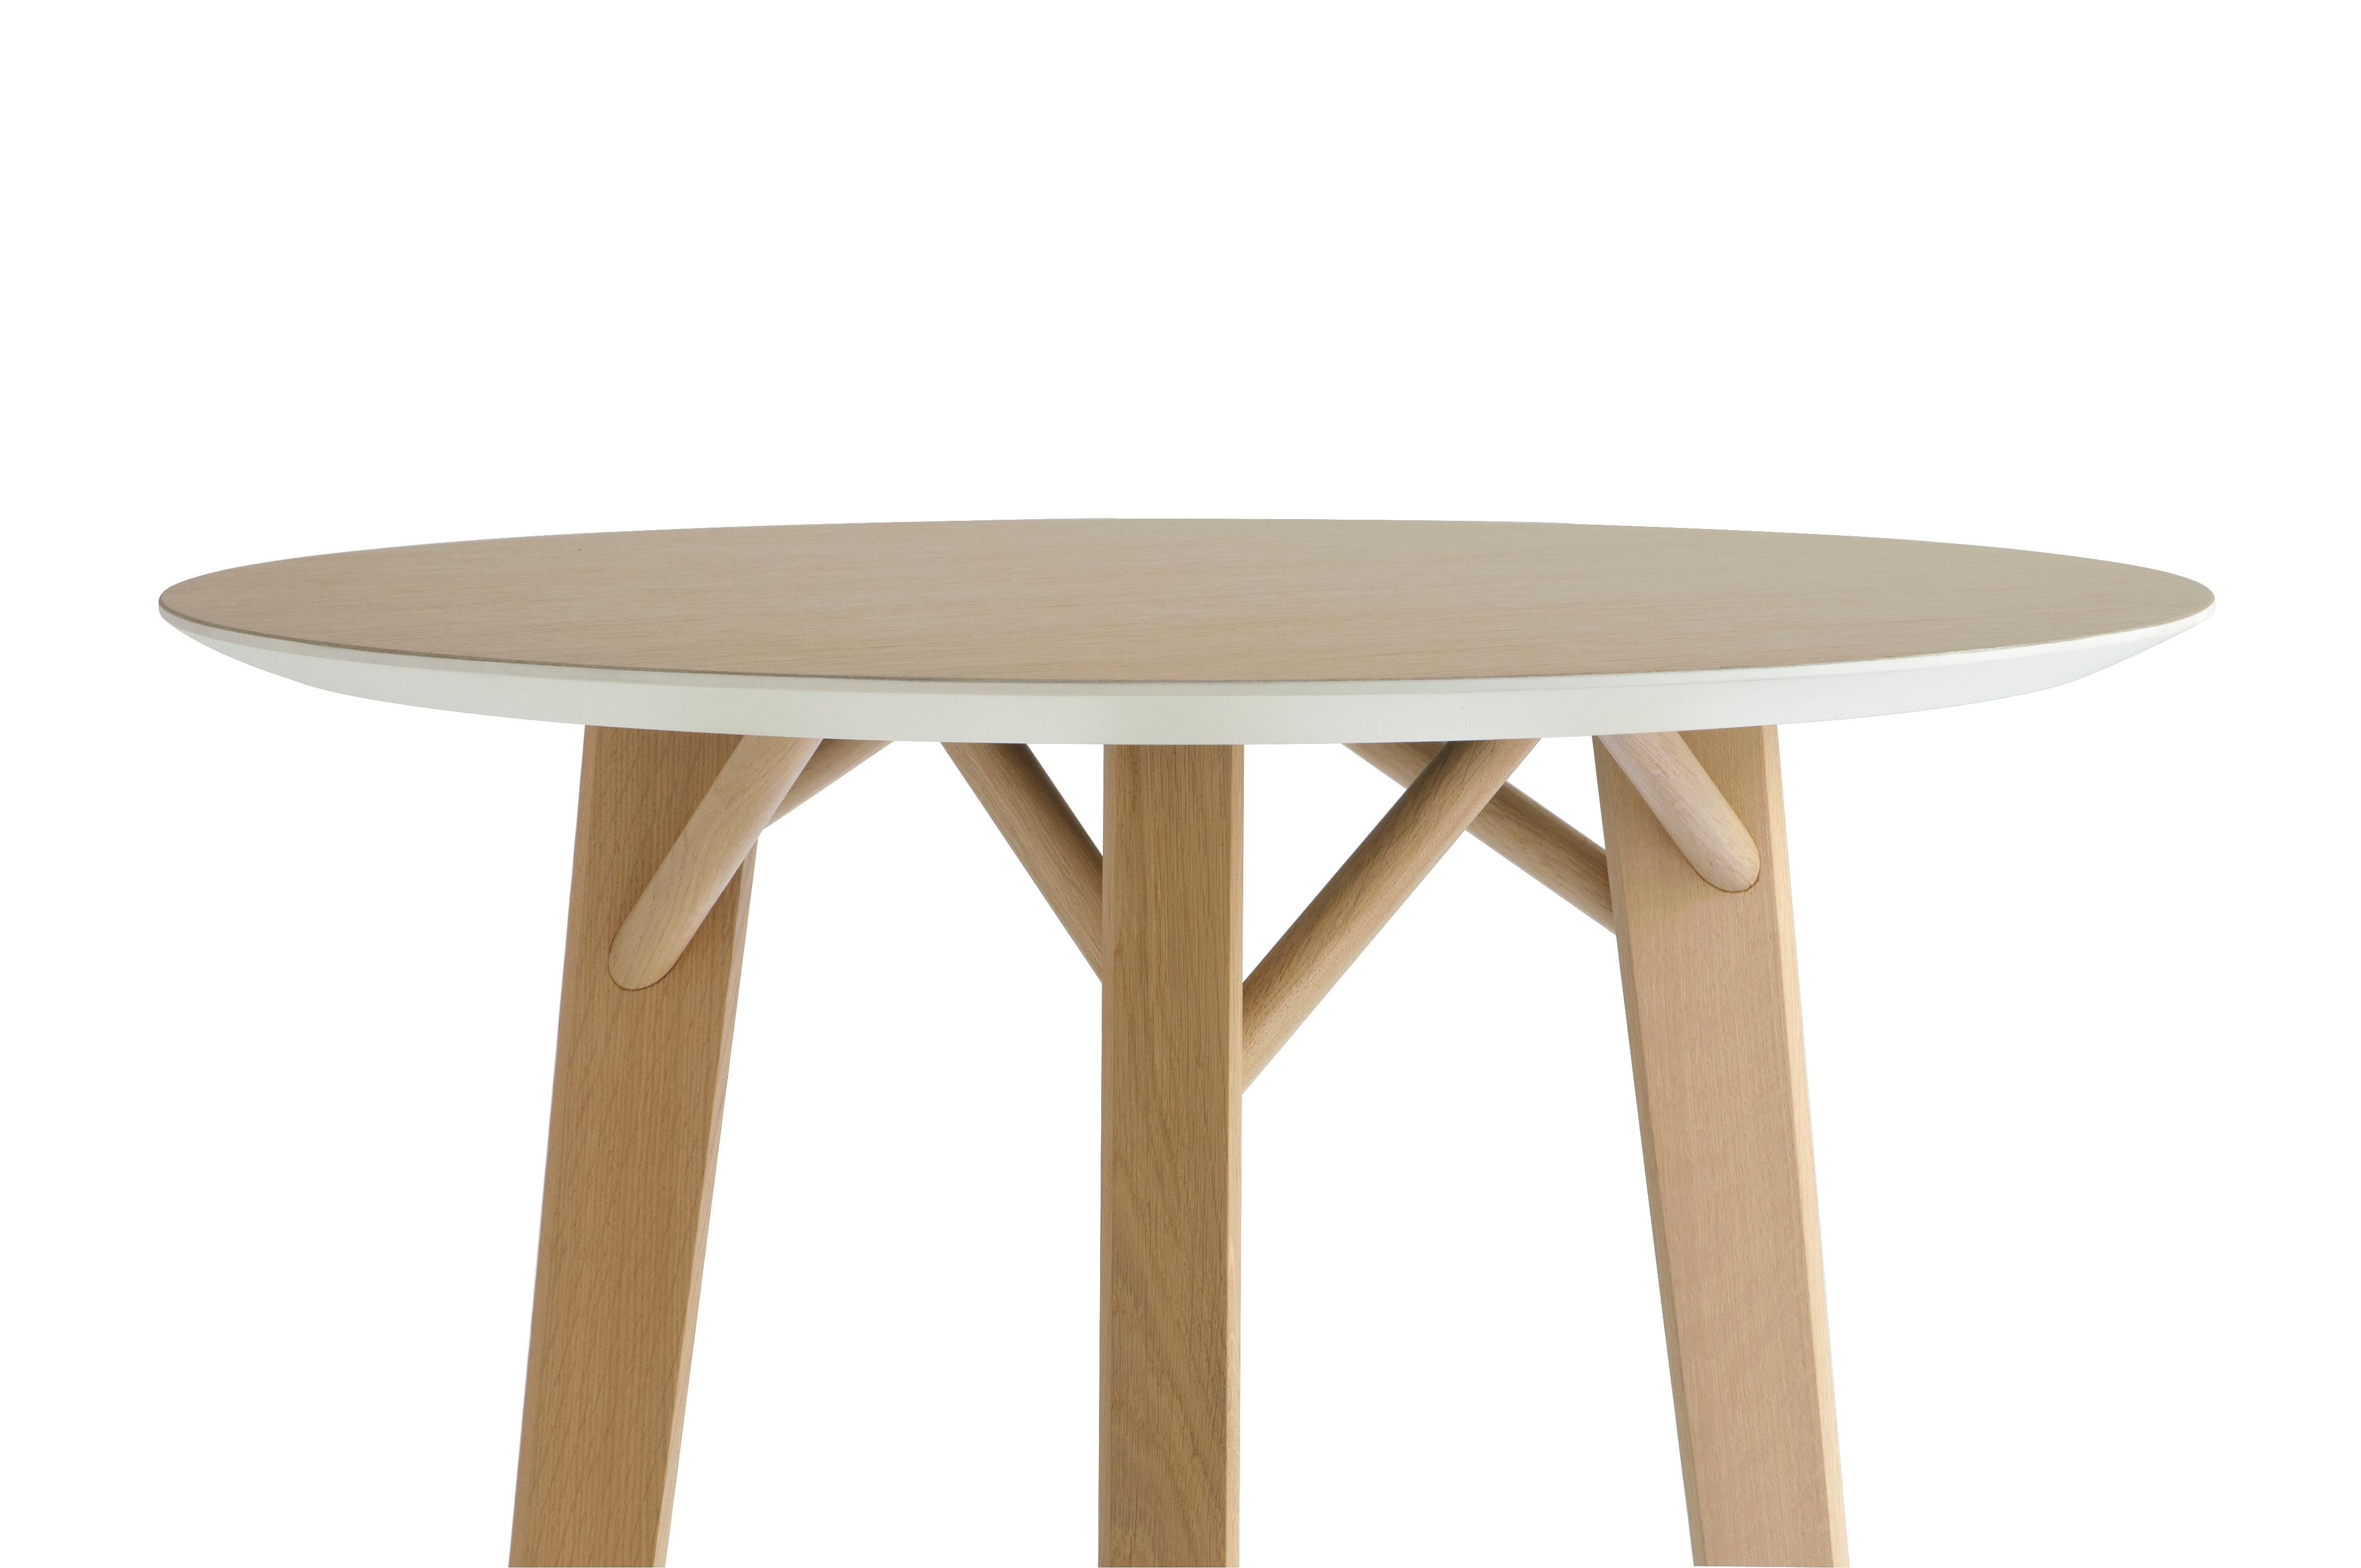 Tria oak tables are characterized by the solid wood legs that take up a triangular section like of the homonymous Tria chairs, evoking tree branches, then assembled on a large variety of table tops, with classical round and rectangular shapes and